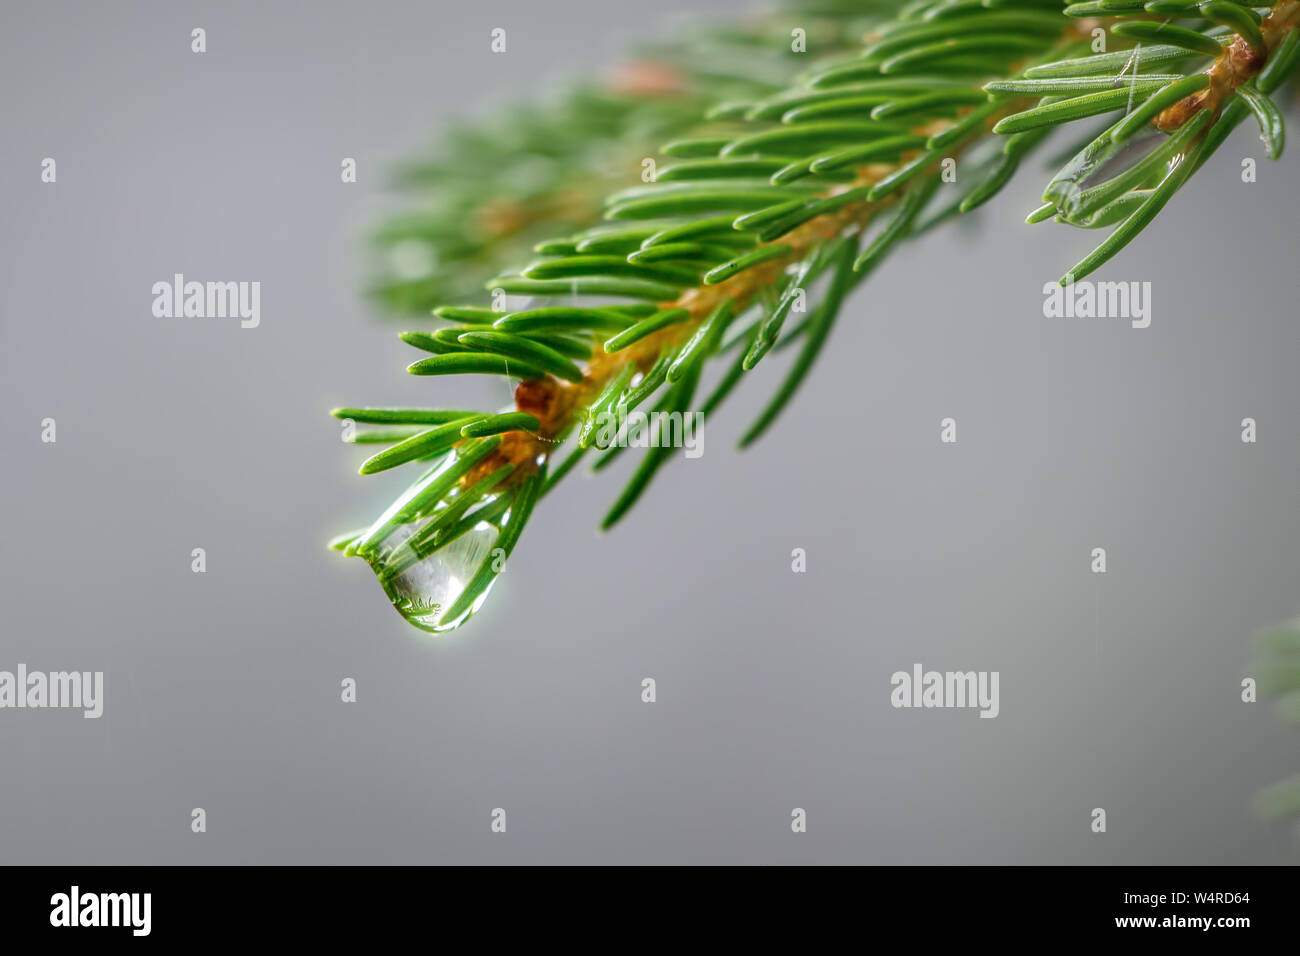 Close-up picture of small conifer branch with glittering drop of water, concept of pure clean nature Stock Photo